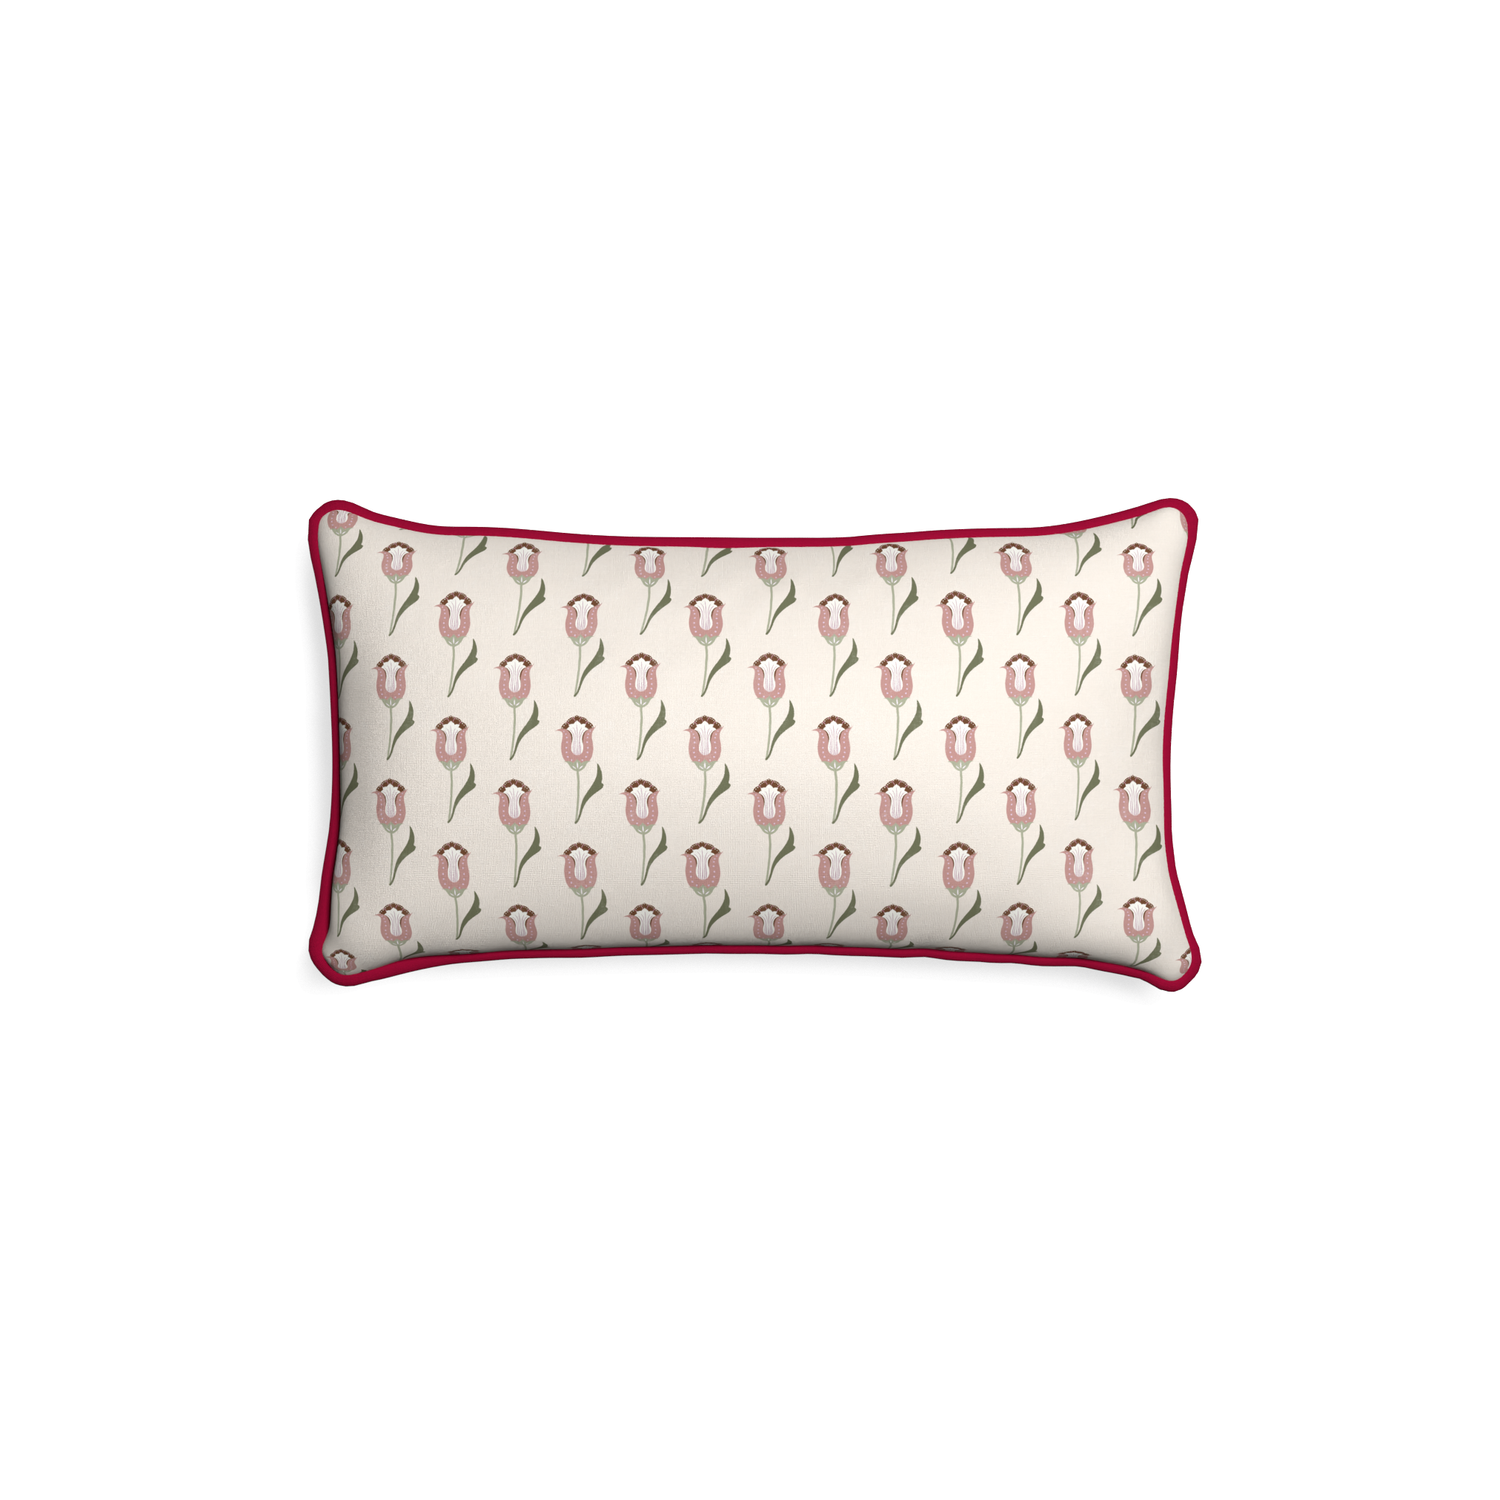 Petite-lumbar annabelle orchid custom pink tulippillow with raspberry piping on white background